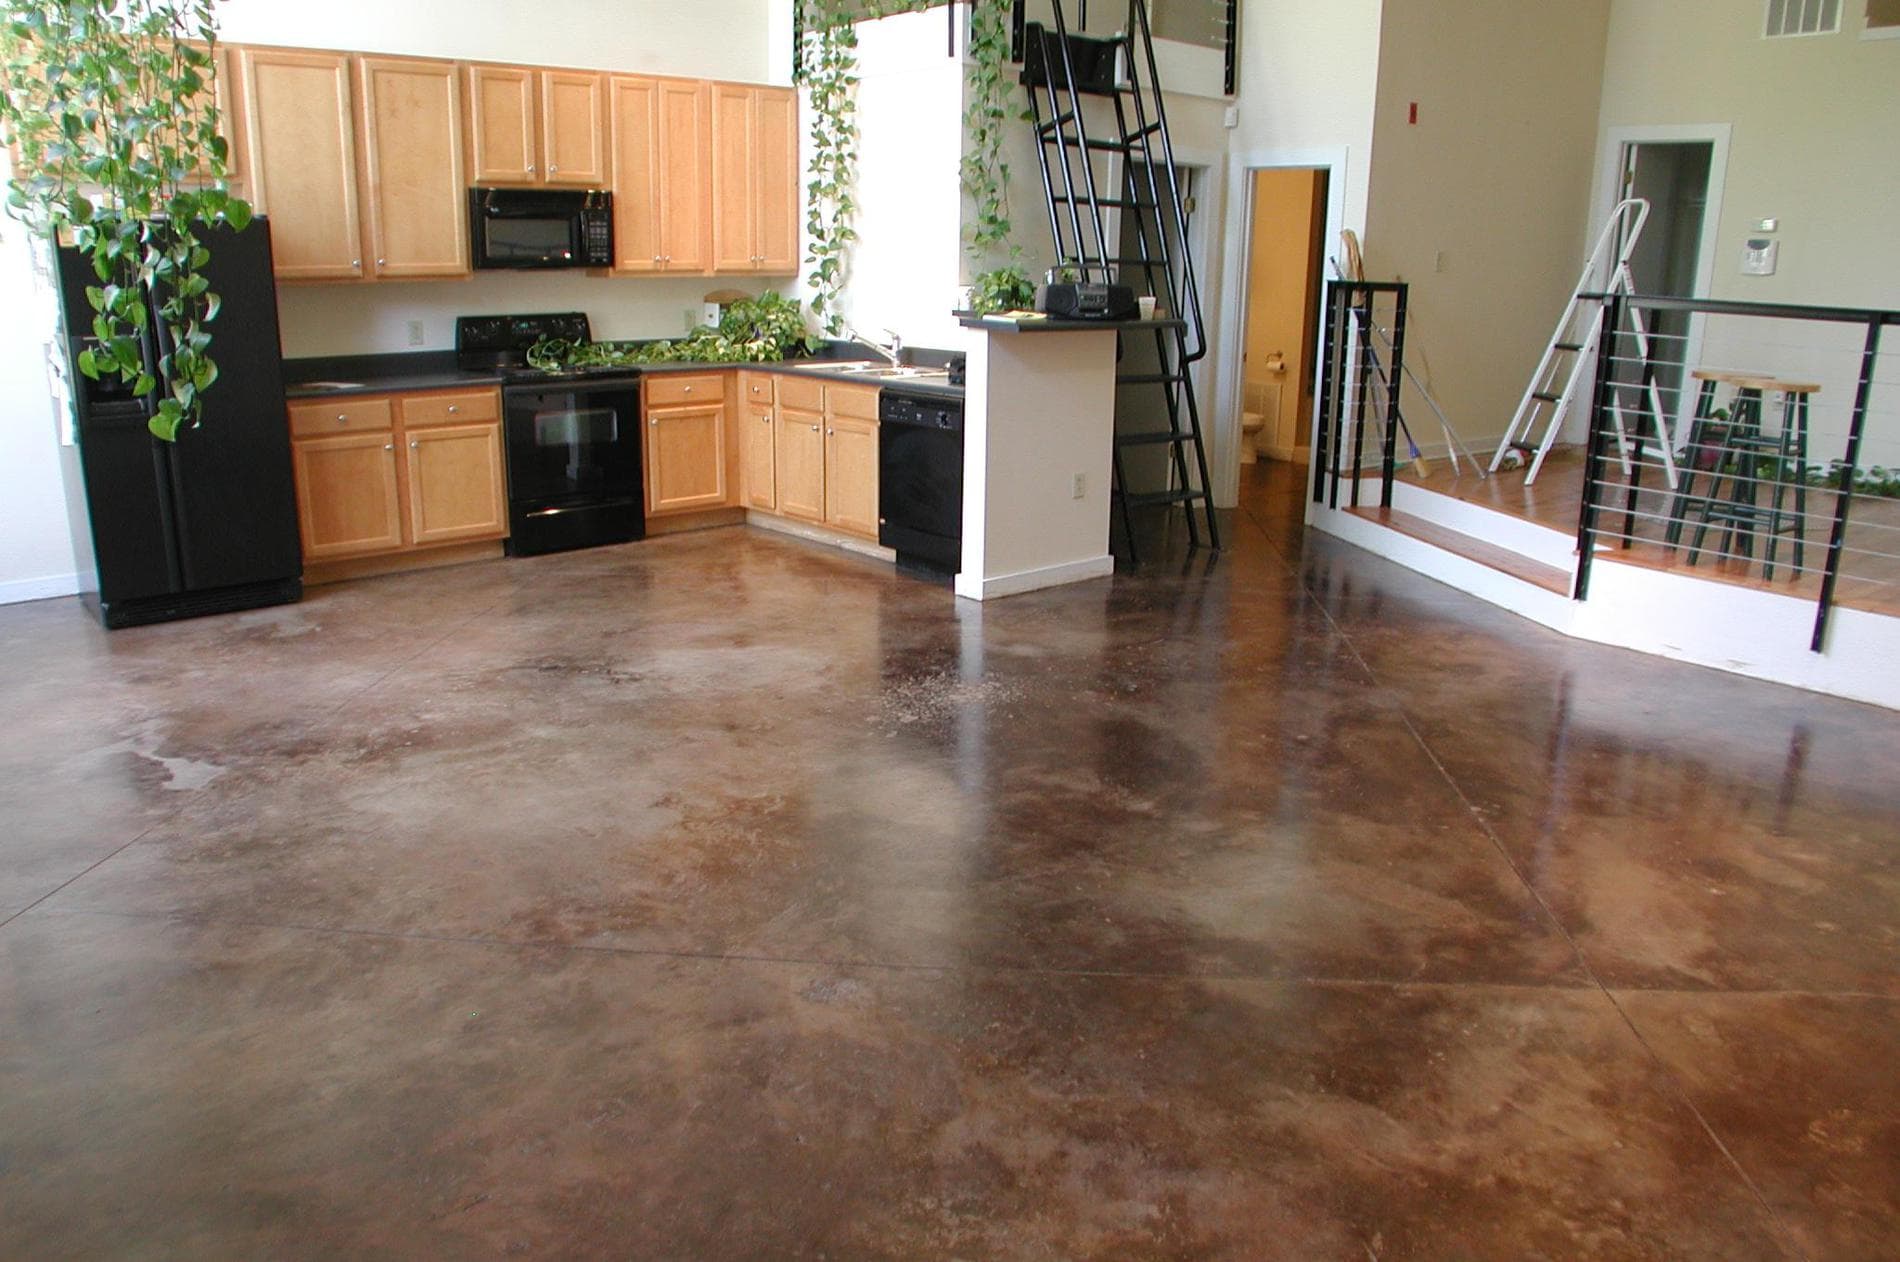 What is the Most Durable Paint for Concrete Floors?